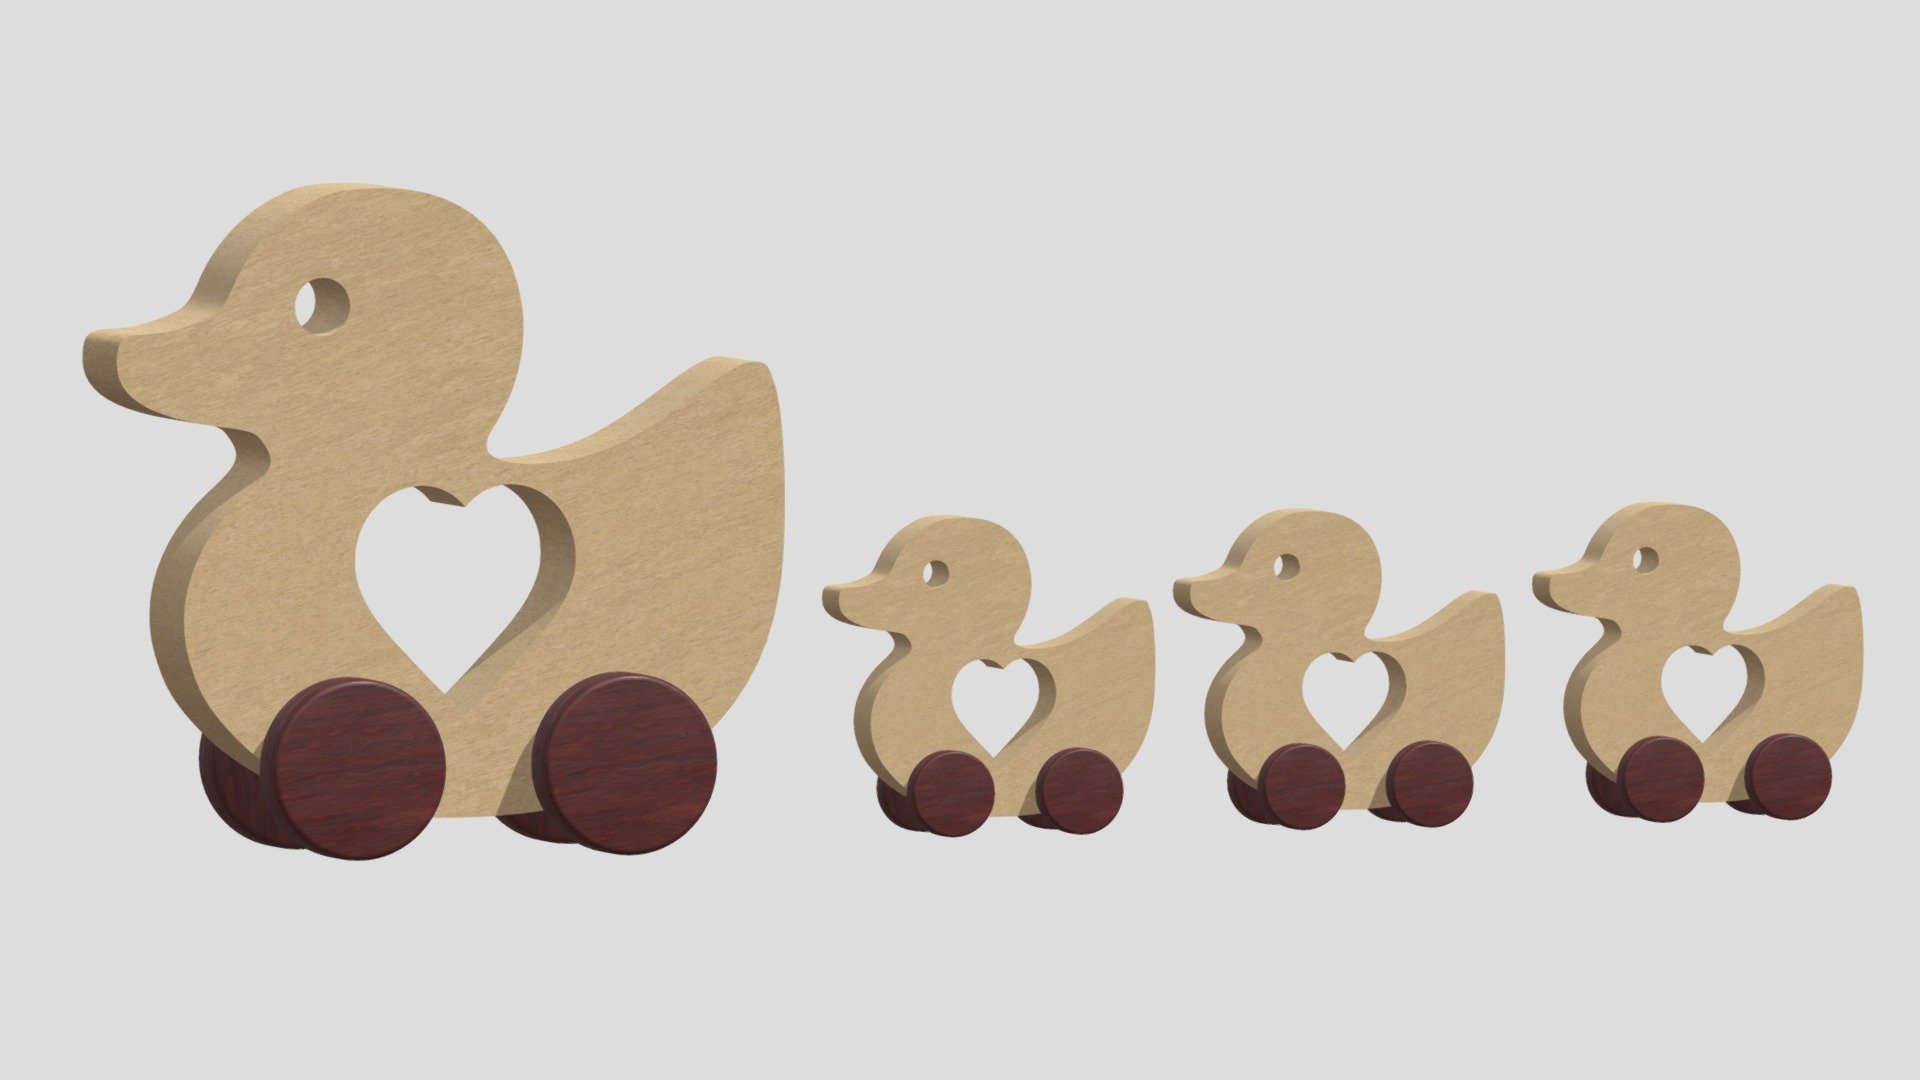 -Wooden Toy Duck.

-This product contains 12 objects.

-Vert: 4.011 poly: 3,763

-Objects and materials have the correct names.

-Real World Scale.

-This product was created in Blender 2.935.

-Formats: blend, fbx, obj, c4d, dae, abc, stl, u4d glb, unity.

-We hope you enjoy this model.

-Thank you 3d model